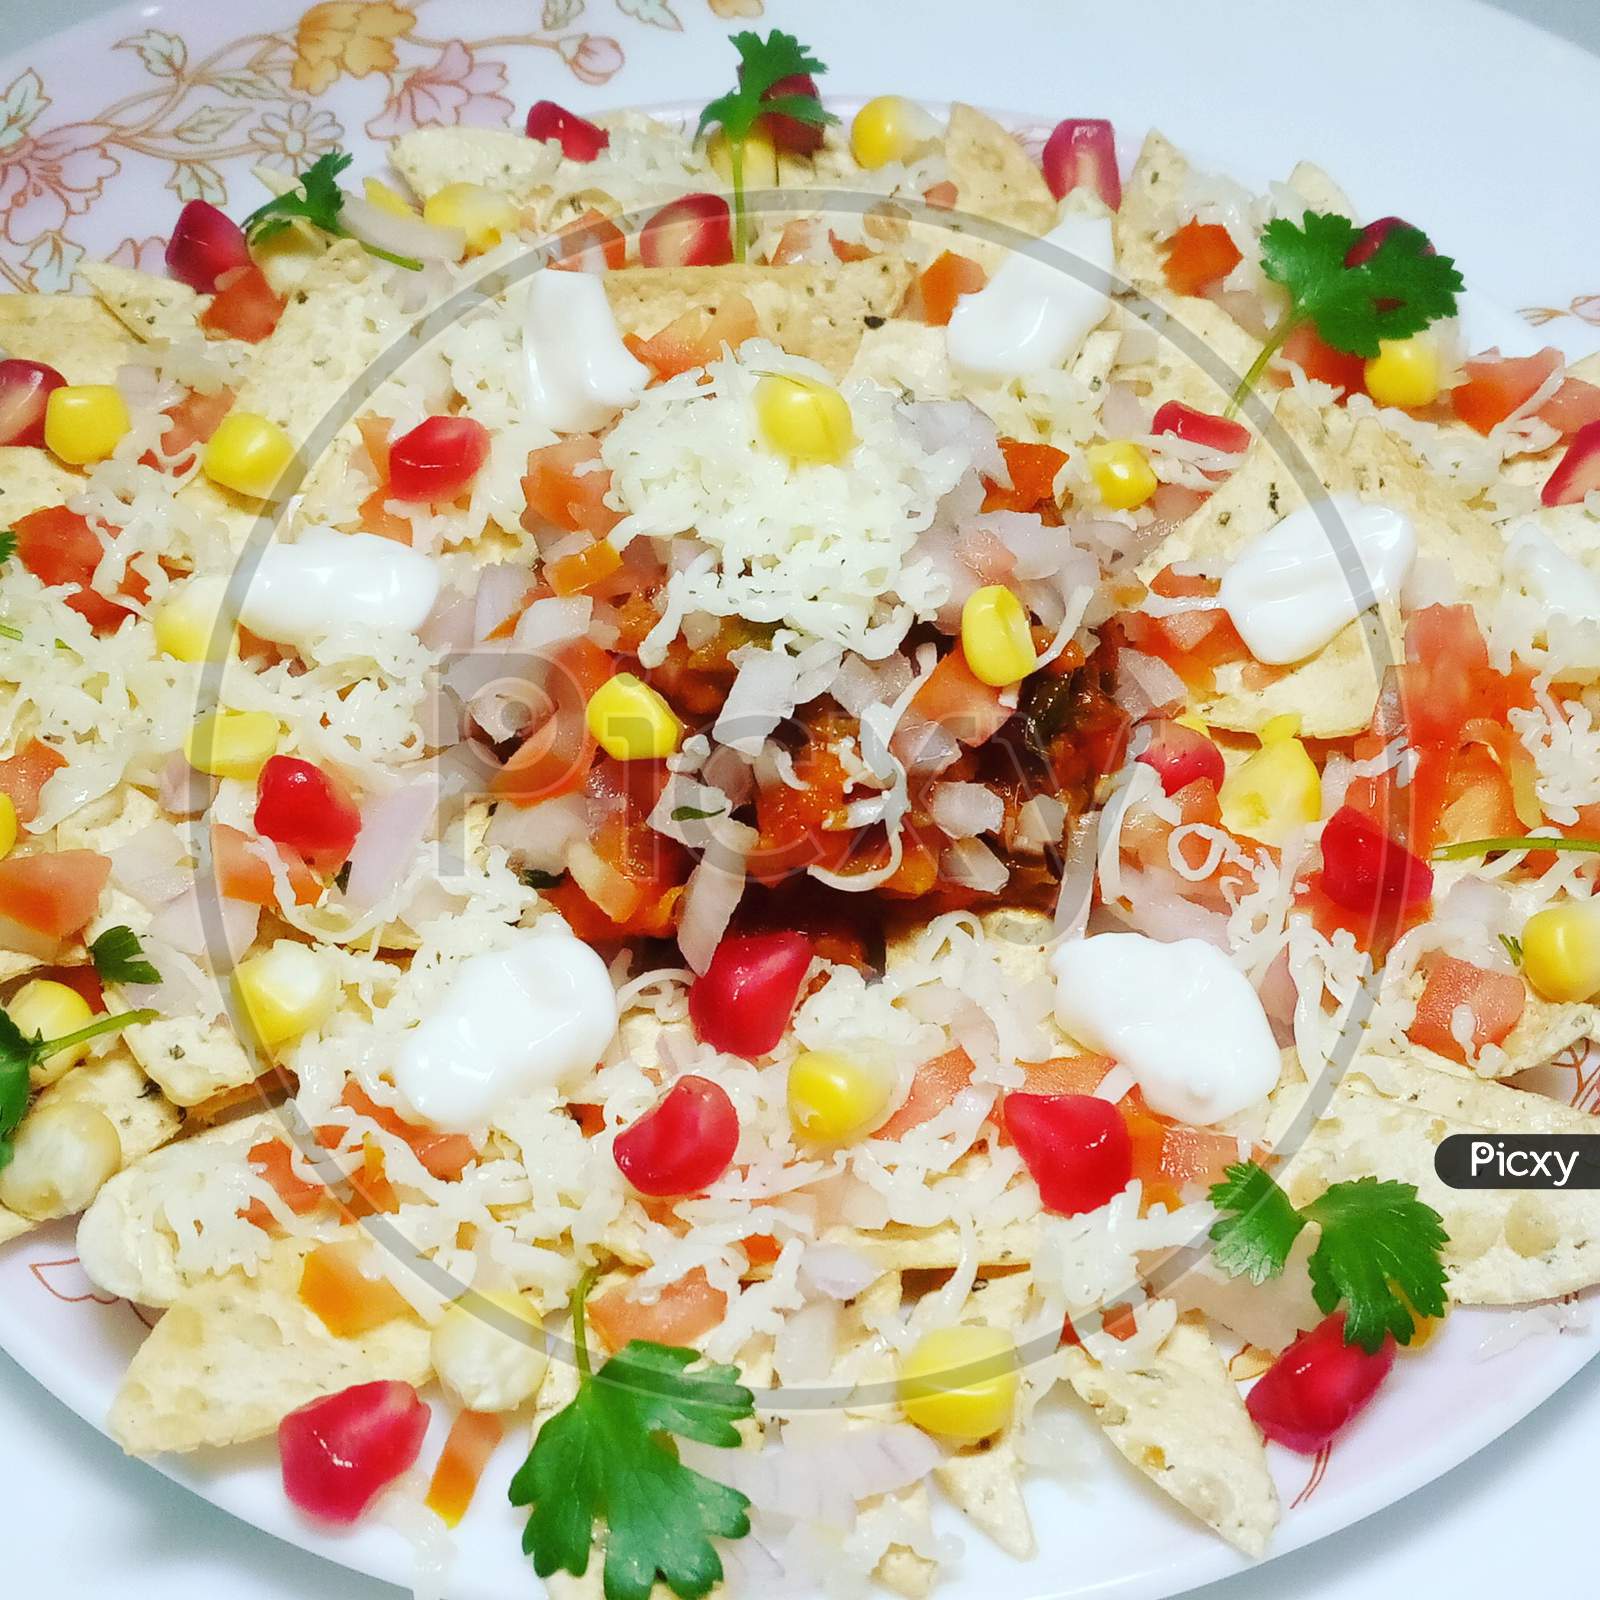 Nachos with salsa and cheese